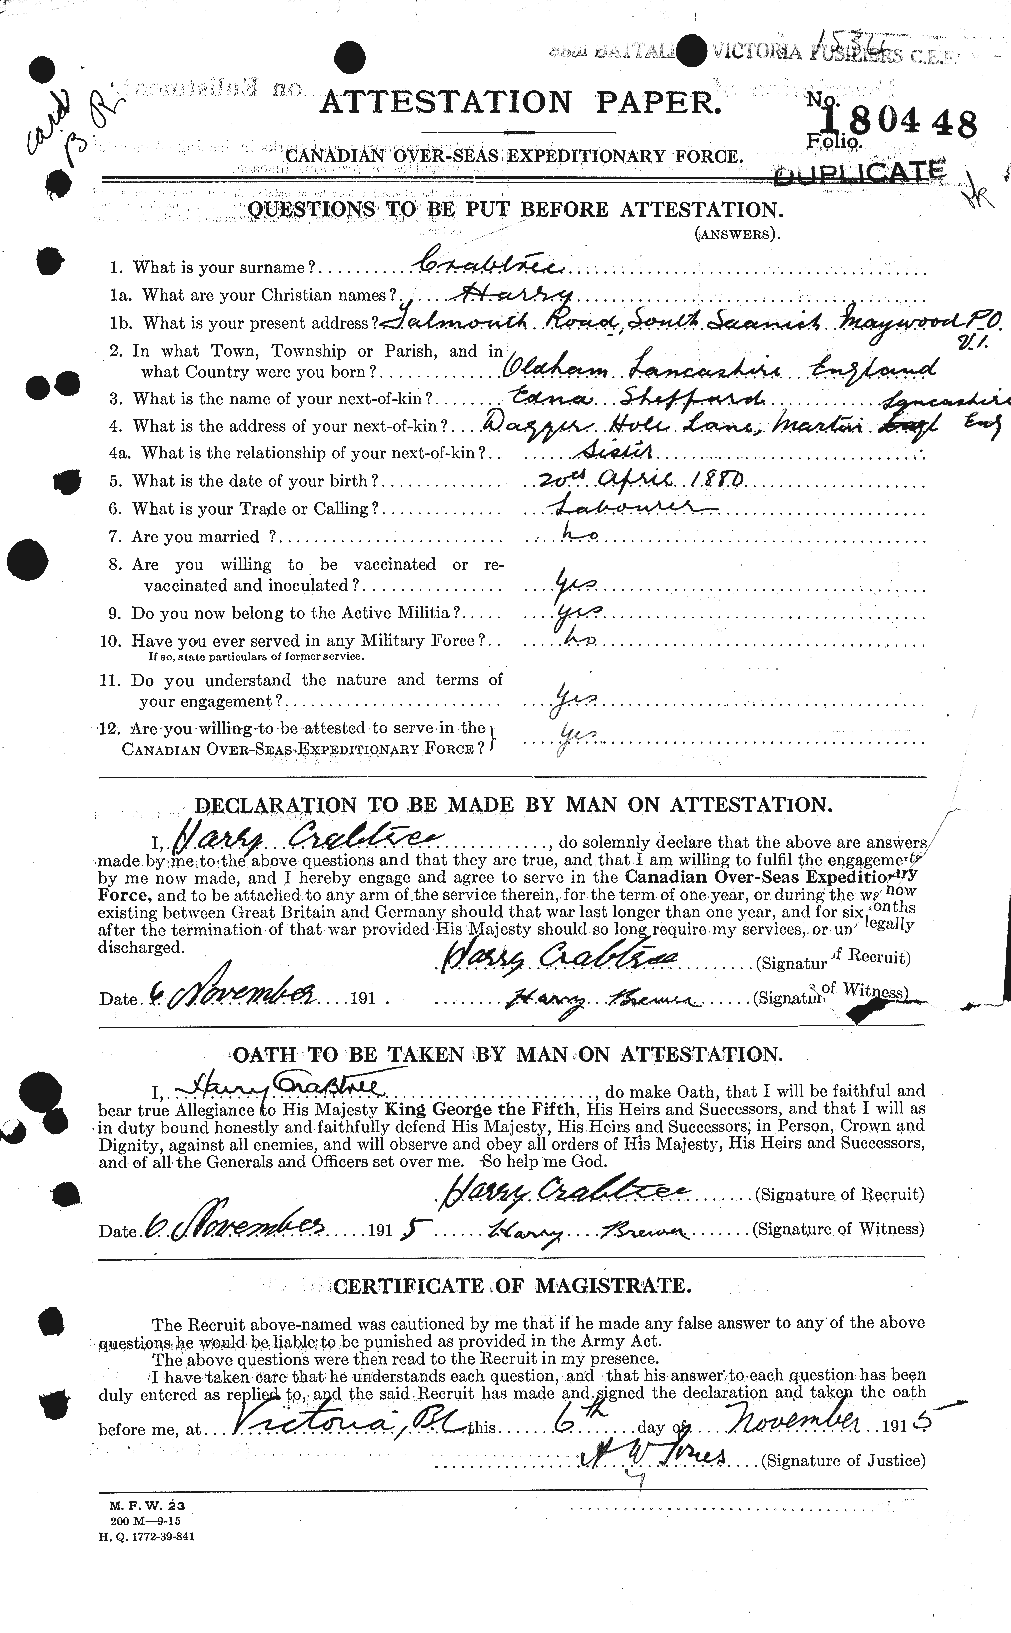 Personnel Records of the First World War - CEF 063322a